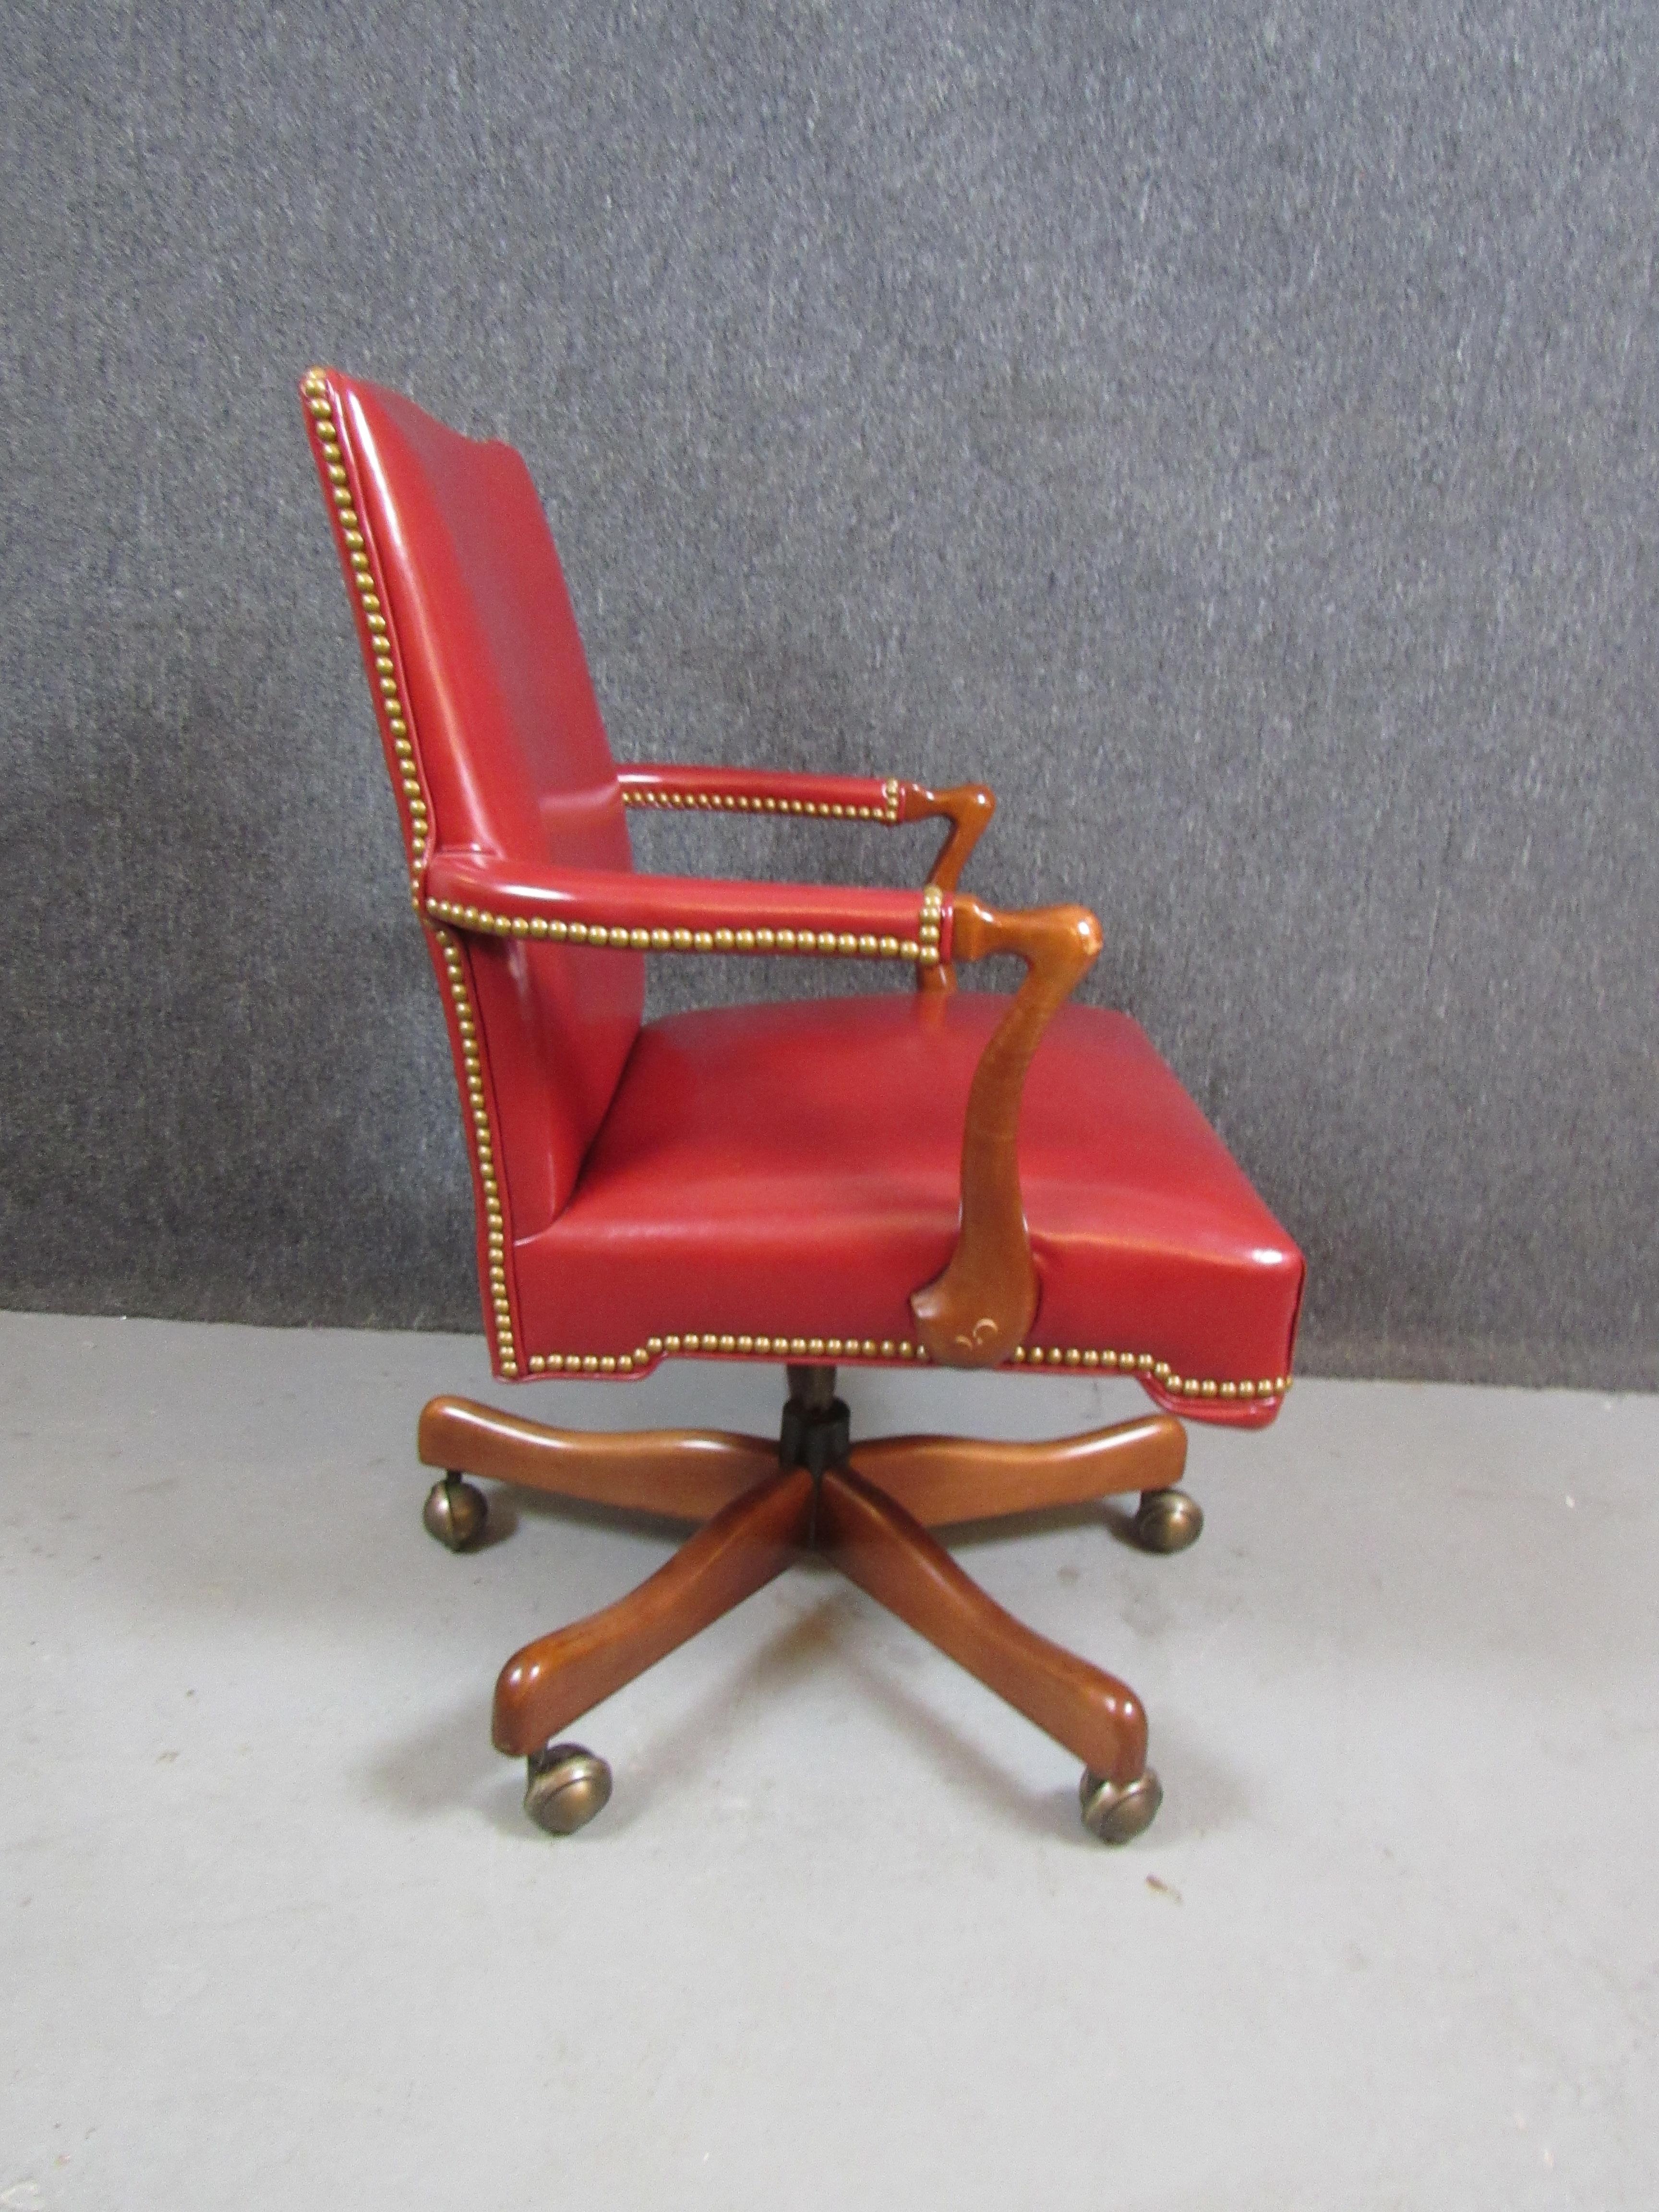 Metal Vintage Red Leather Chesterfield Desk Chair by Thomasville